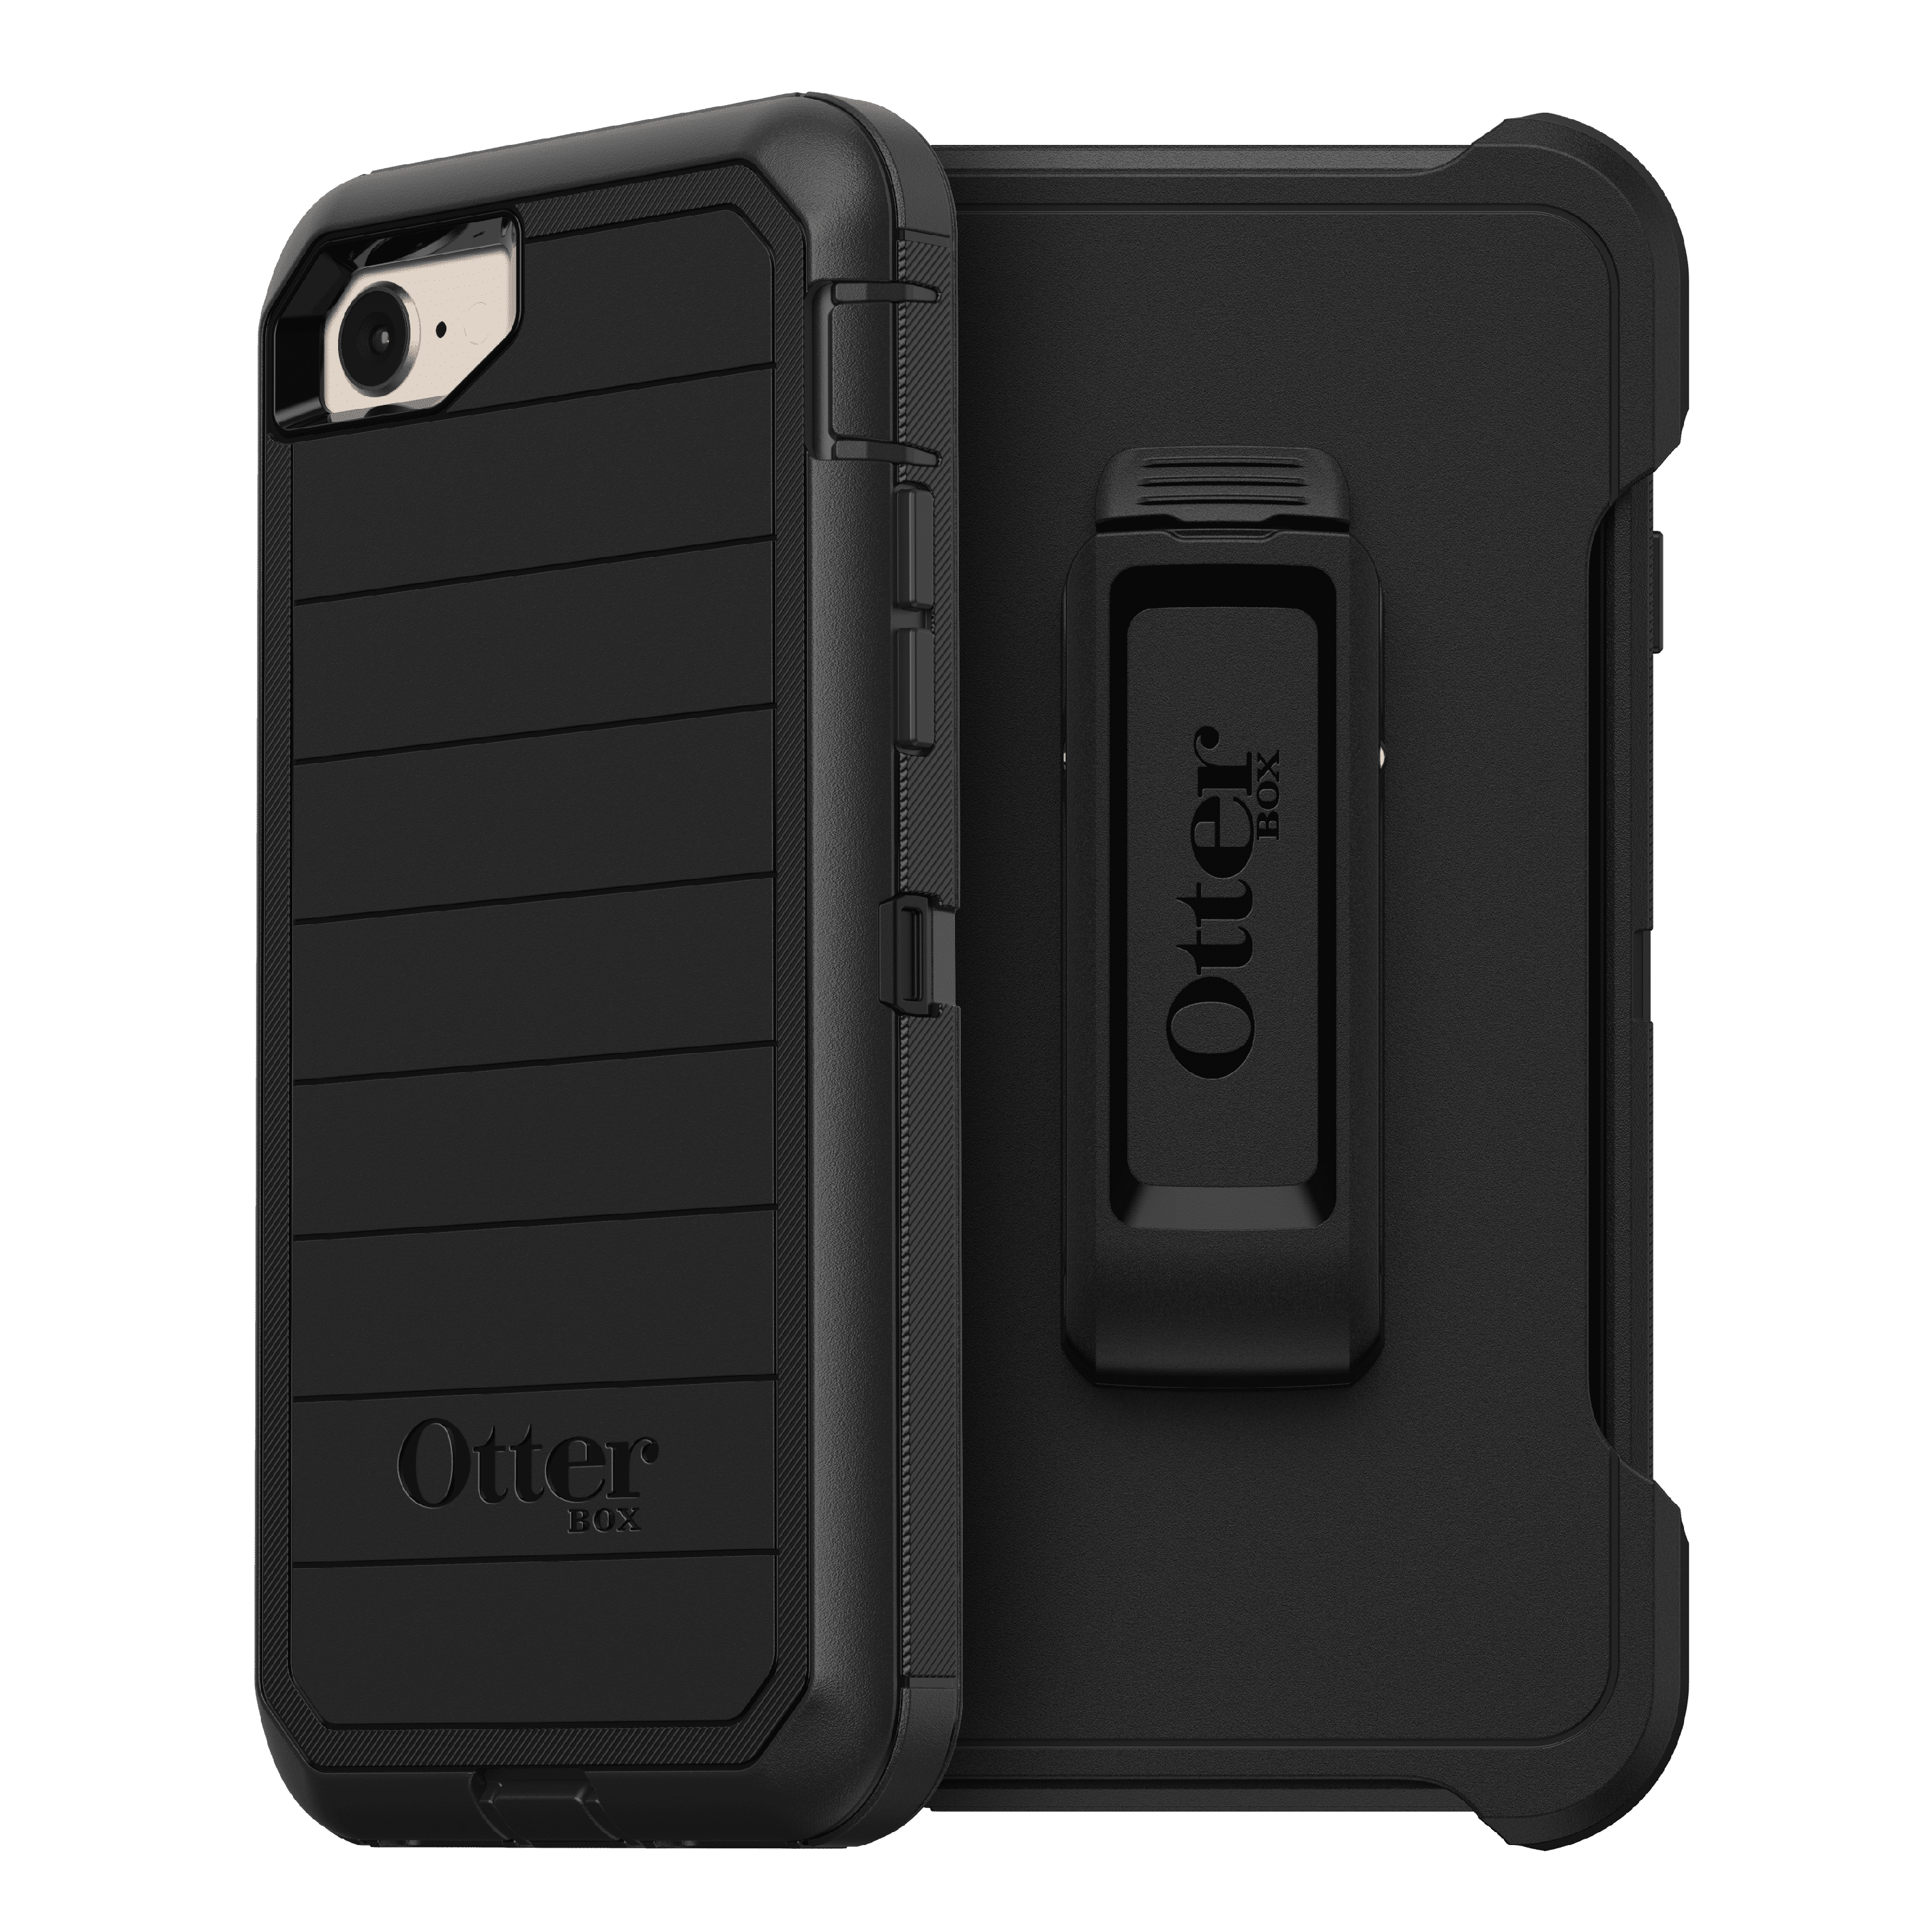 OtterBox Defender Series Pro Case for Apple iPhone 13 - Black